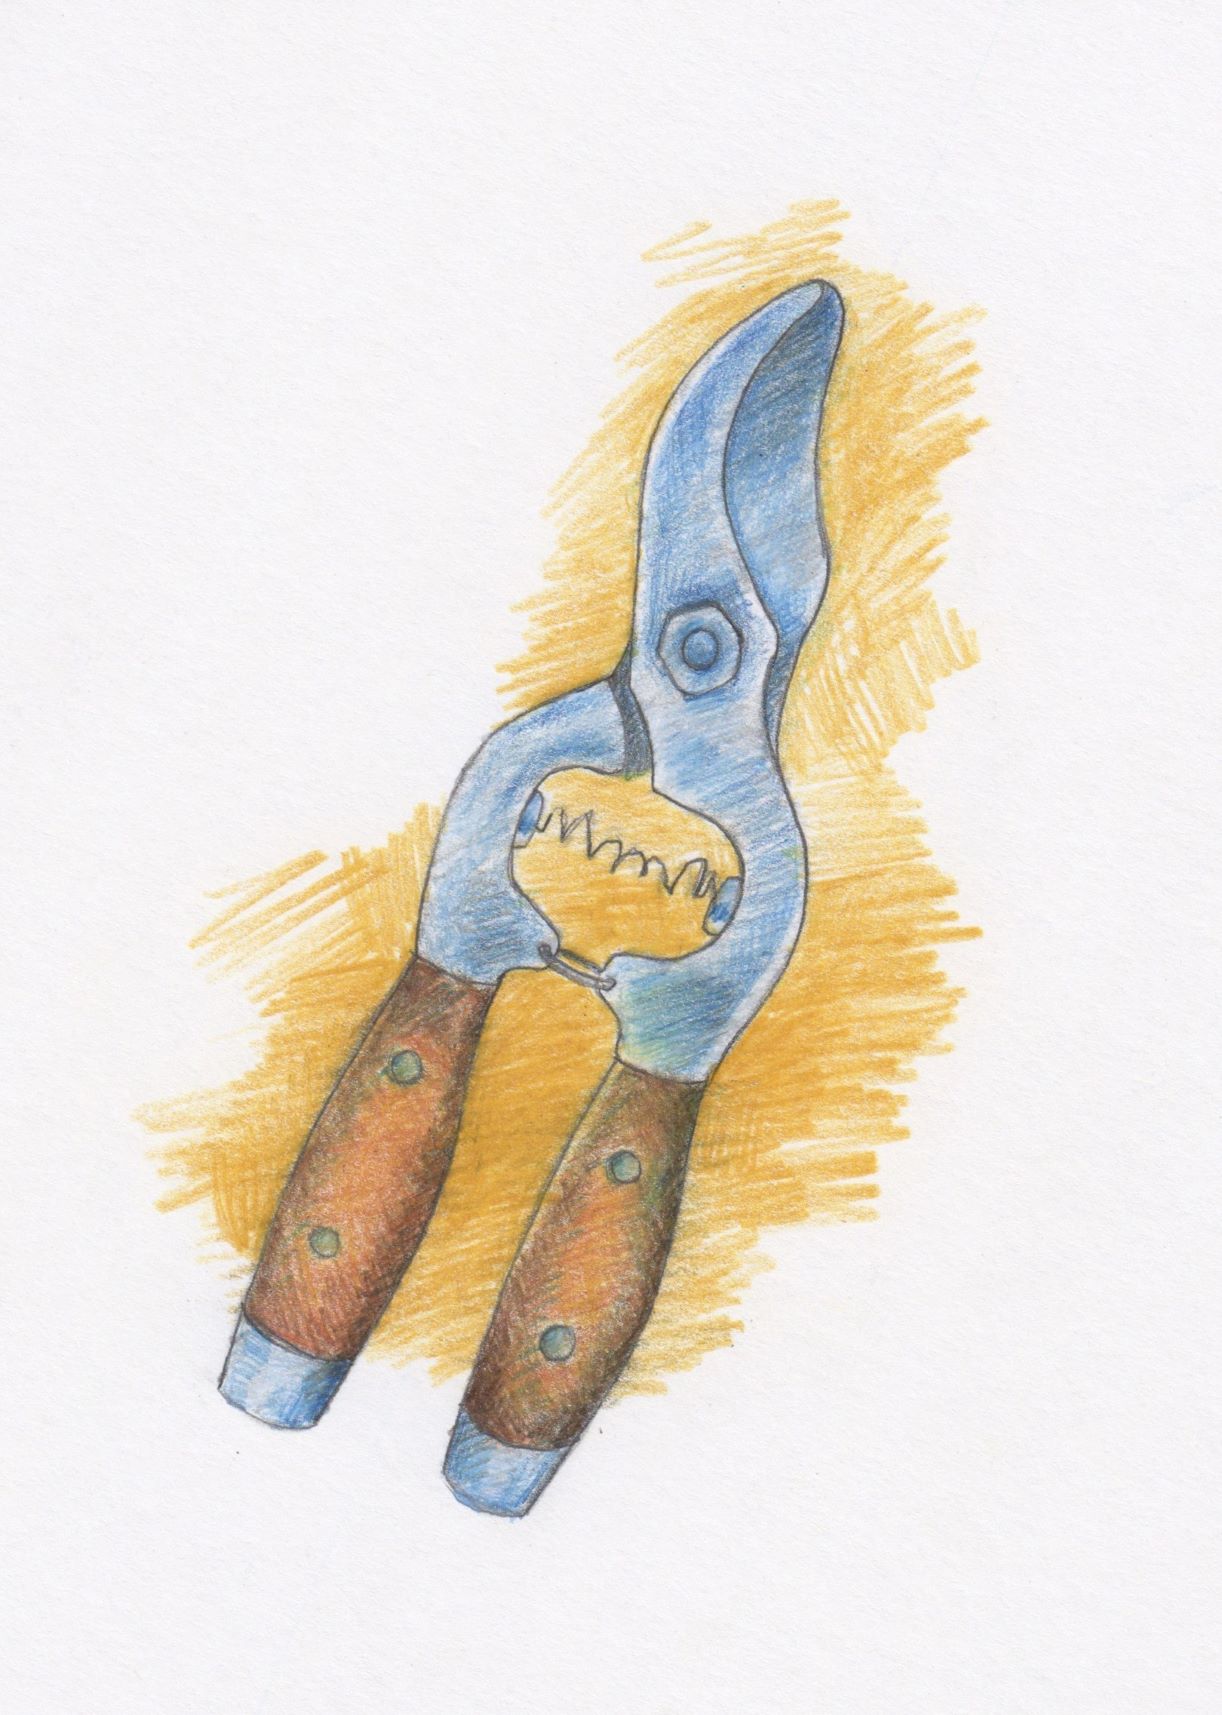 "Pruners" a drawing by Layla Luna for the upcoming book, My Father is the Gardener